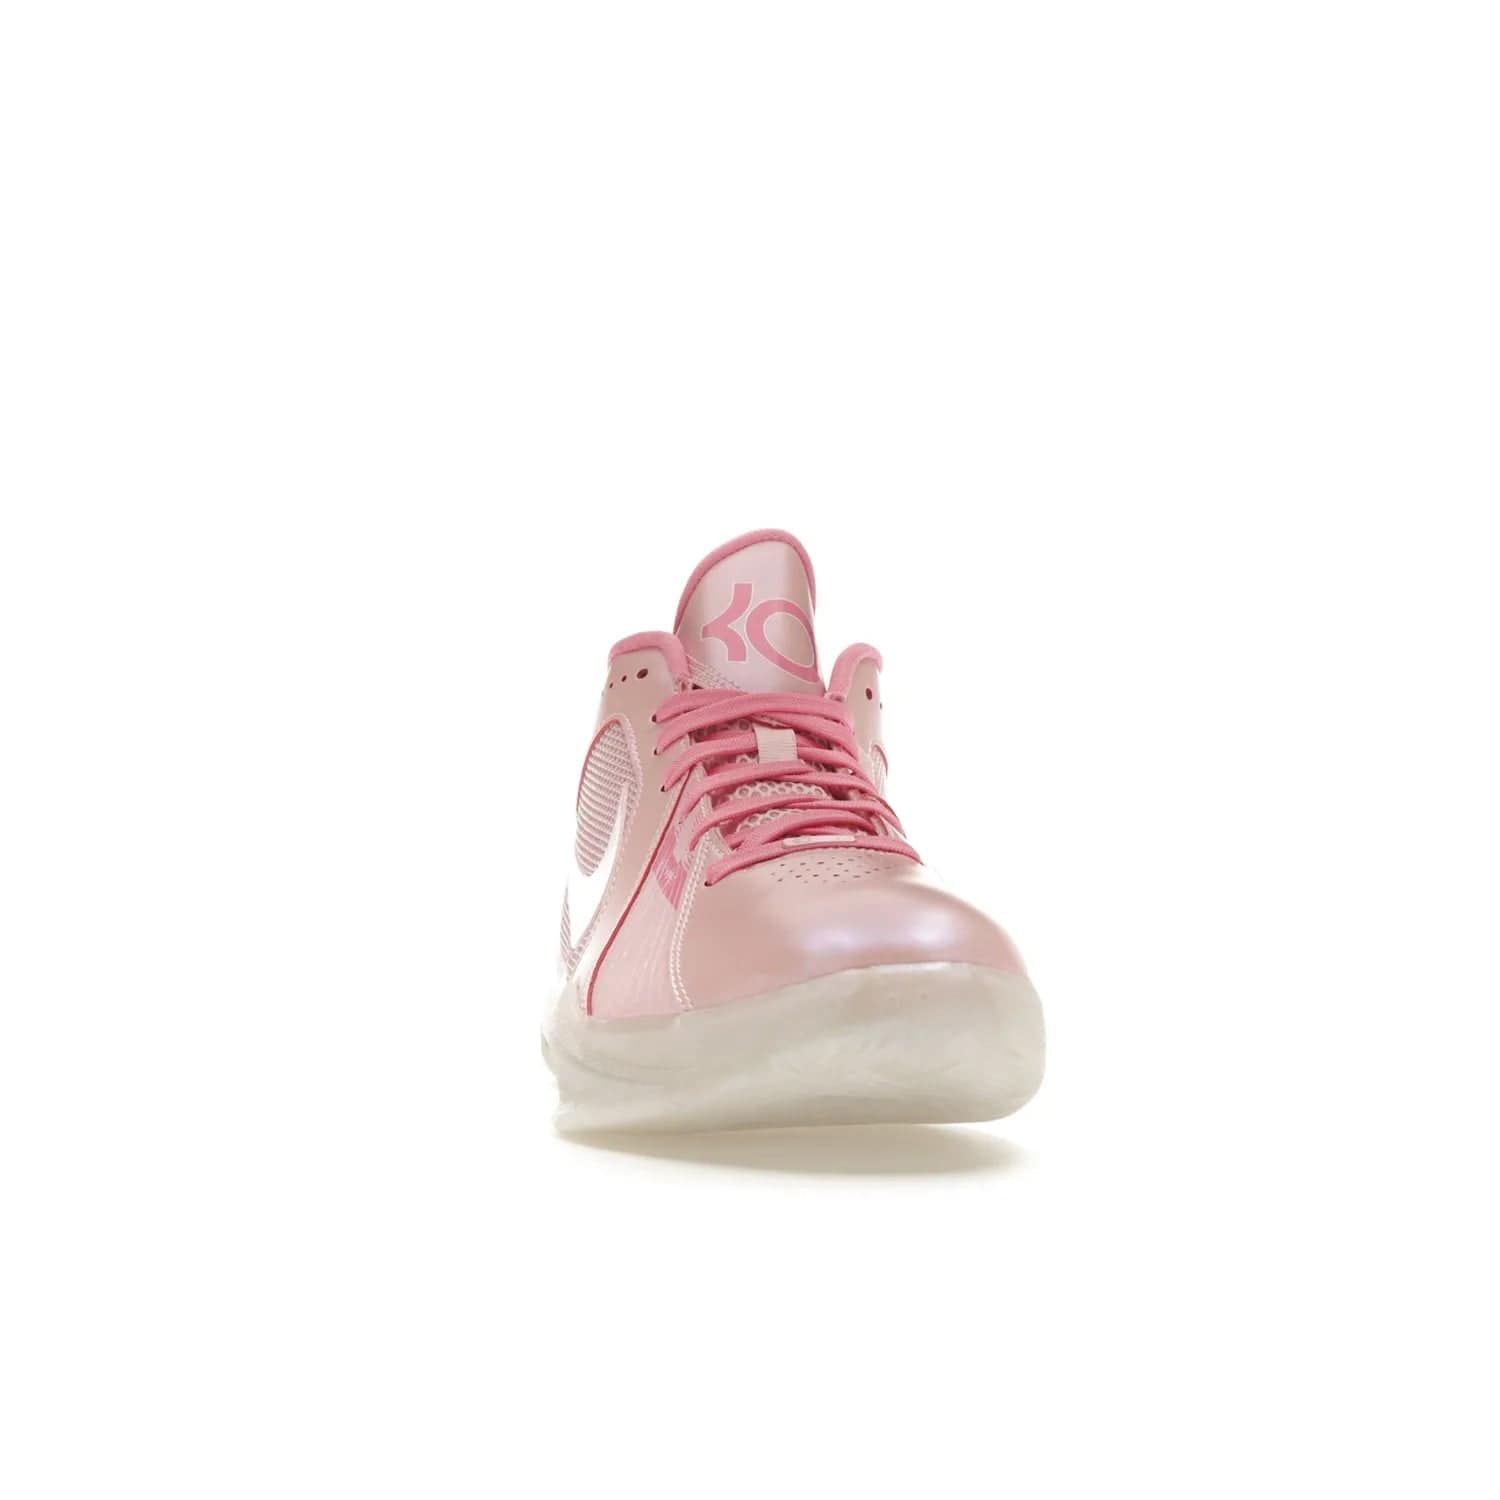 Nike KD 3 Aunt Pearl - Image 9 - Only at www.BallersClubKickz.com - Introducing the Nike KD 3 Aunt Pearl. Featuring a bold Medium Soft Pink, White, & Lotus Pink colorway. Get ready to stand out this October 15th.